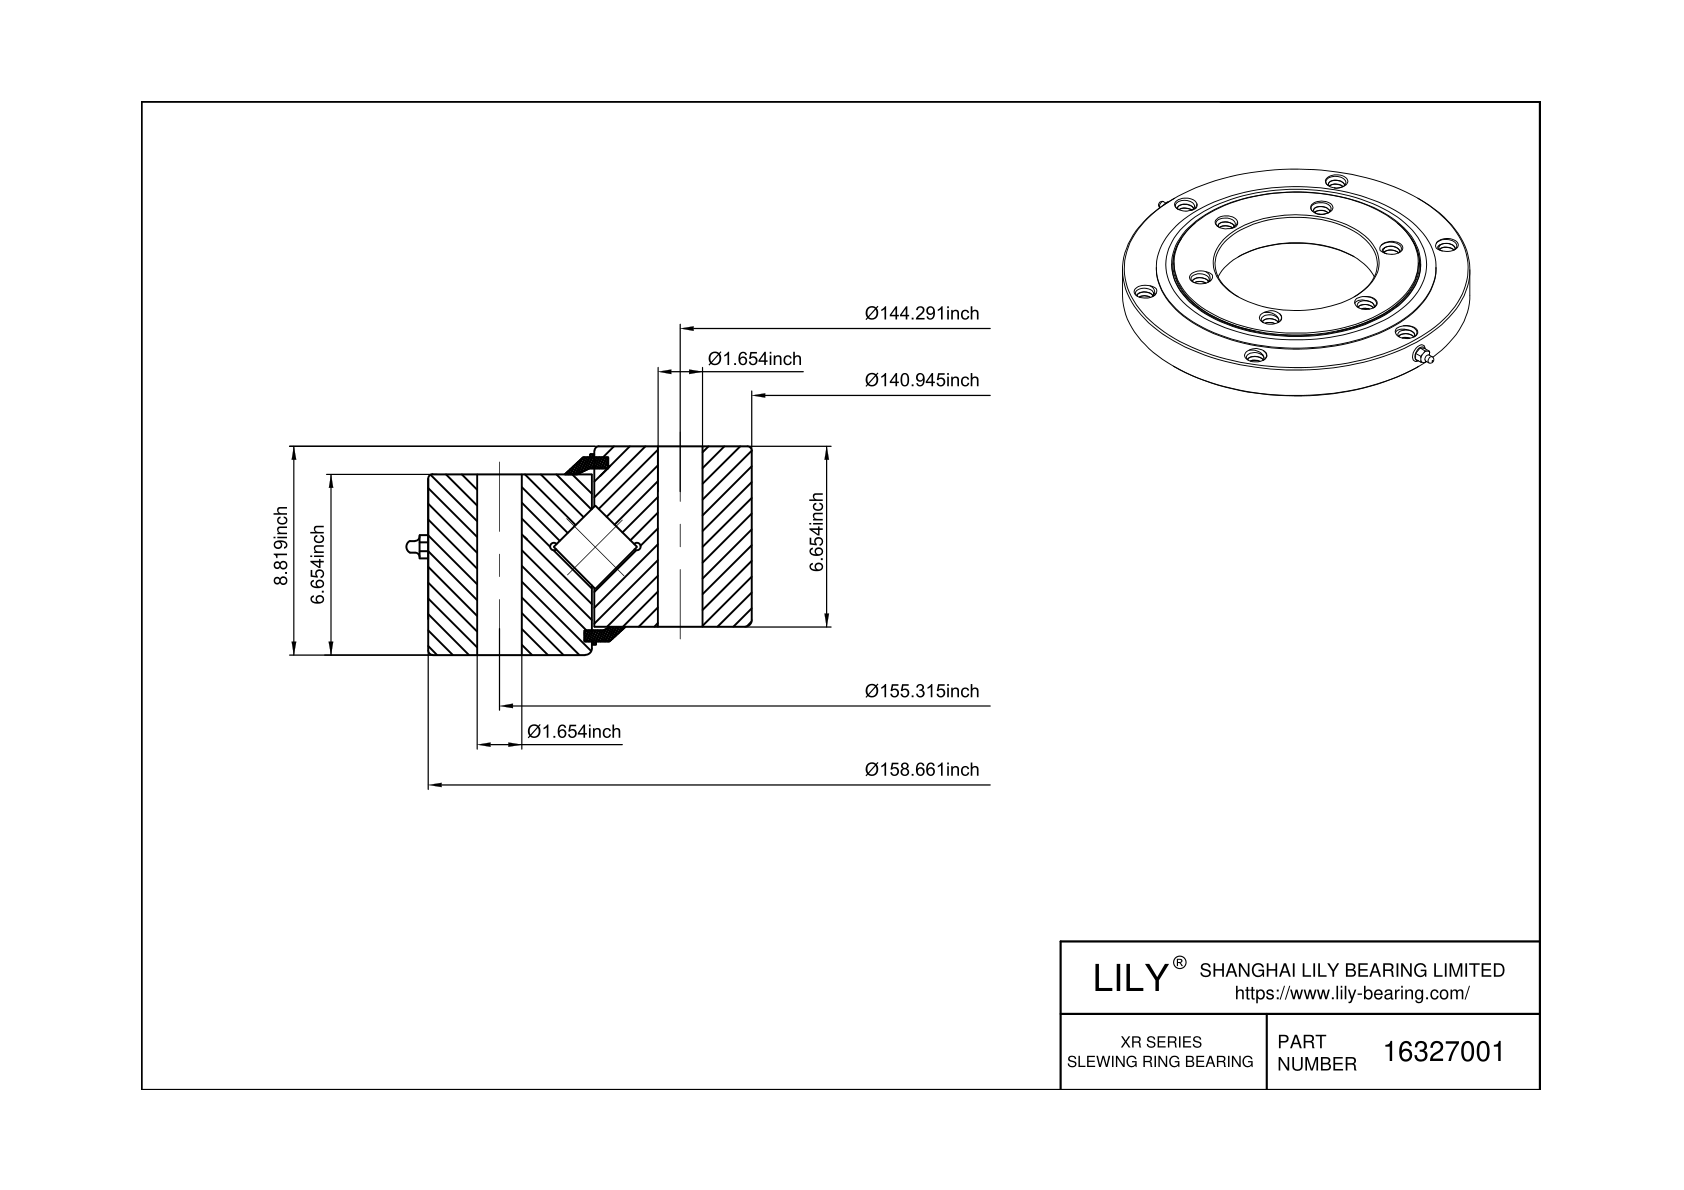 16327001 Cross Roller Slewing Ring Bearing cad drawing